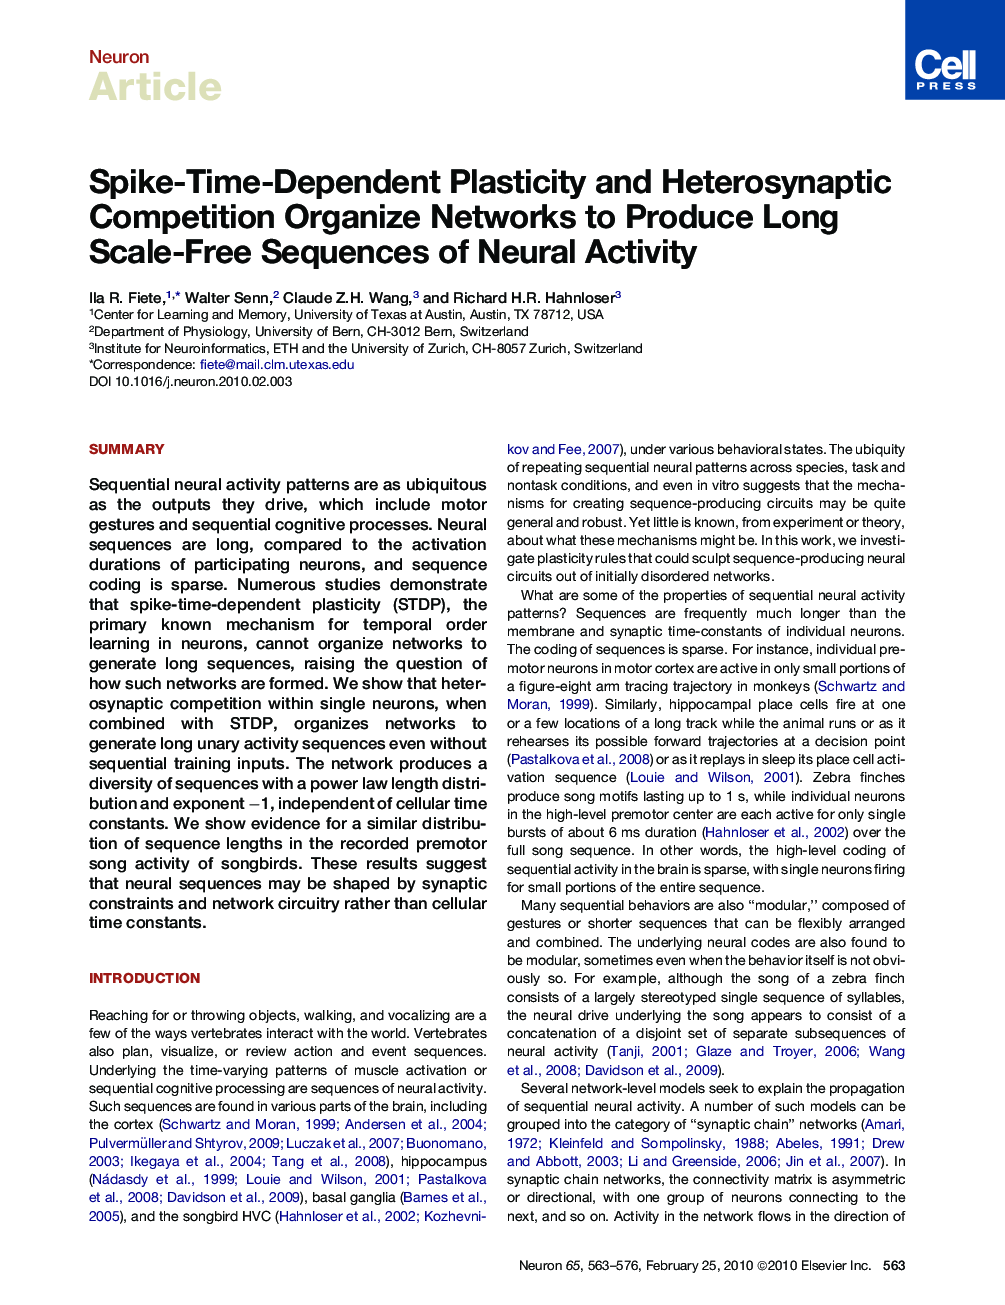 Spike-Time-Dependent Plasticity and Heterosynaptic Competition Organize Networks to Produce Long Scale-Free Sequences of Neural Activity